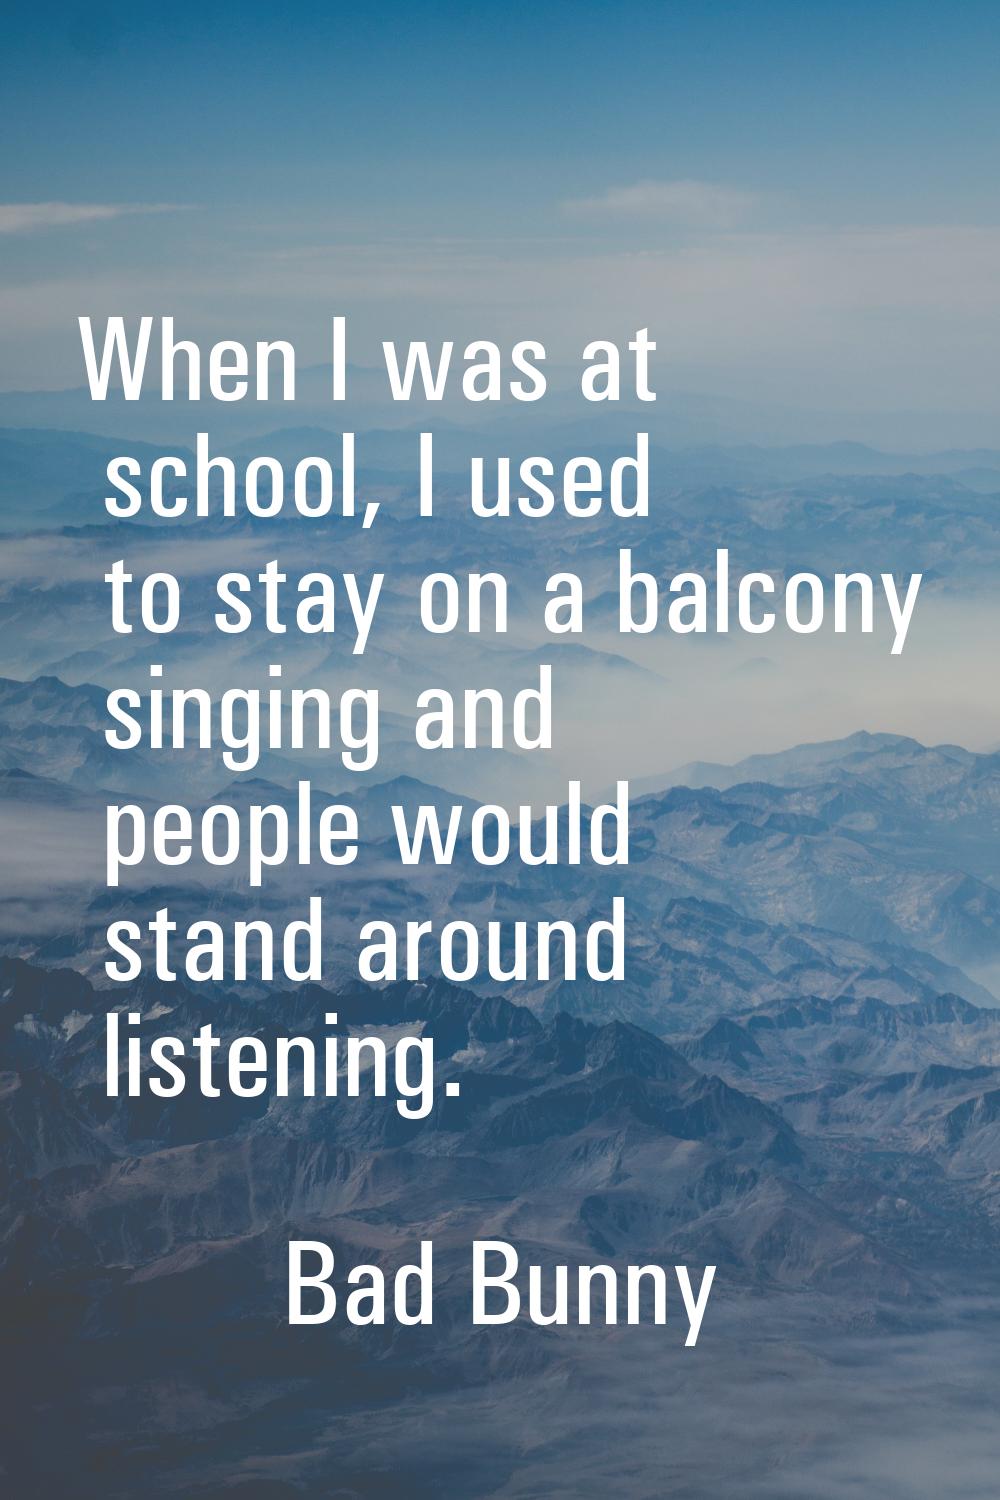 When I was at school, I used to stay on a balcony singing and people would stand around listening.